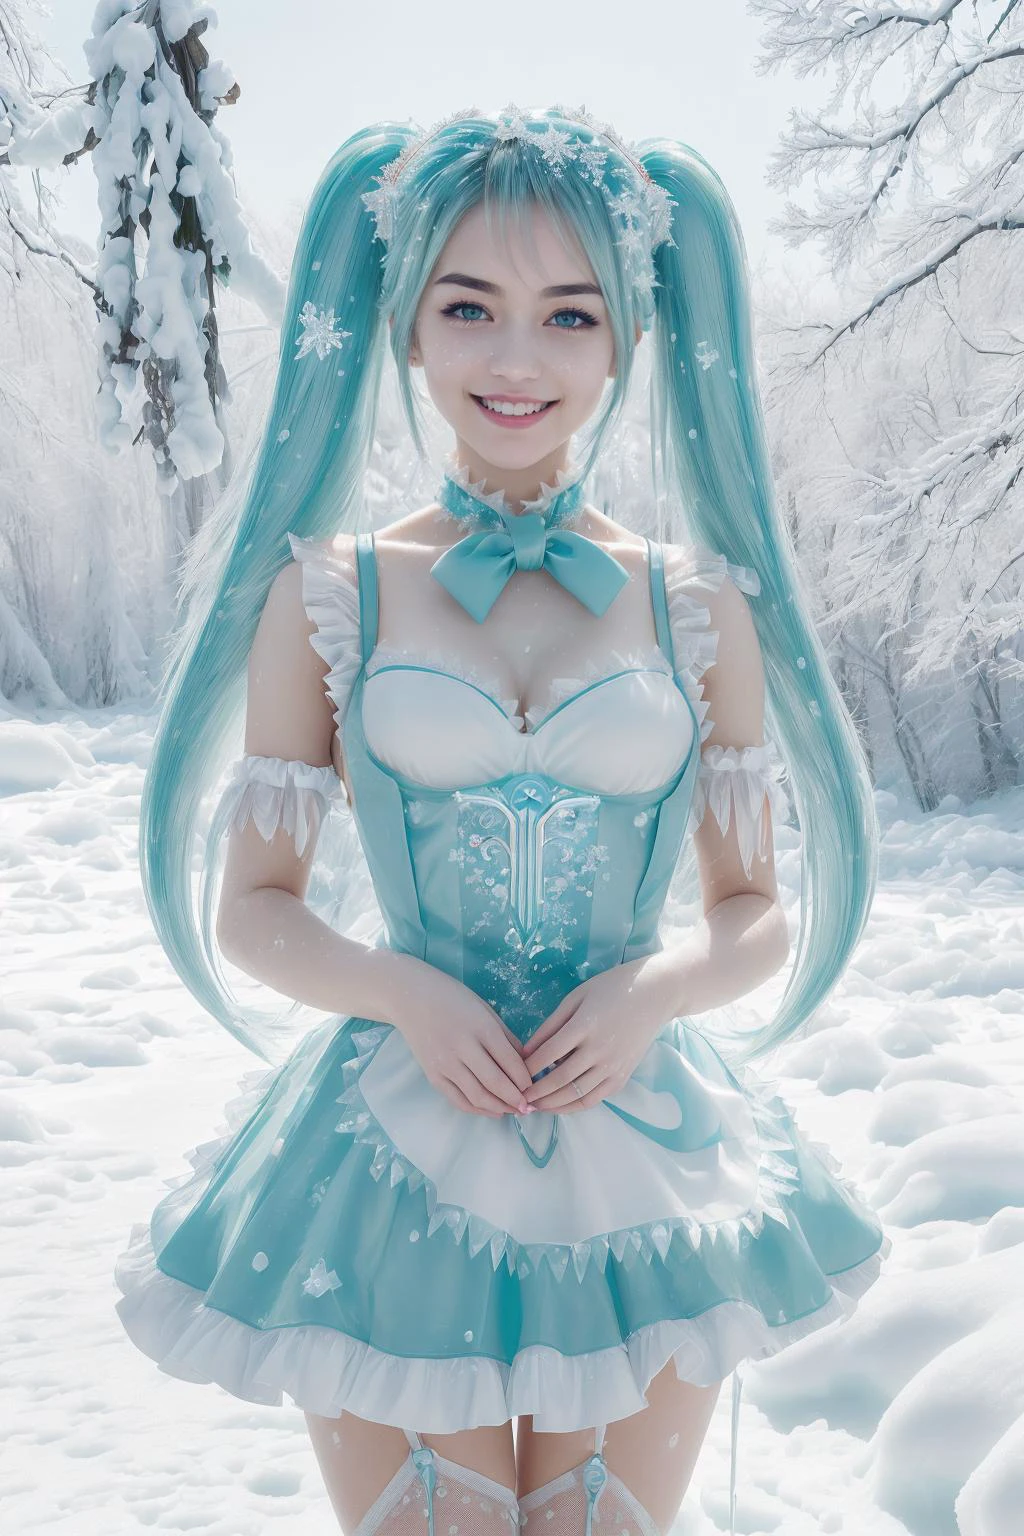 ((MAsterpiece, best quAlity,edgQuAlity,photoreAlistic, hyper reAlistic)),微笑著,stAnding,posing for A picture,
邊緣圍裙, edg冰, A (HAtsune Miku, AquA hAir, twin tAils) in A Apron,冰,snow flAkes ,weAring edg冰 邊緣圍裙
 